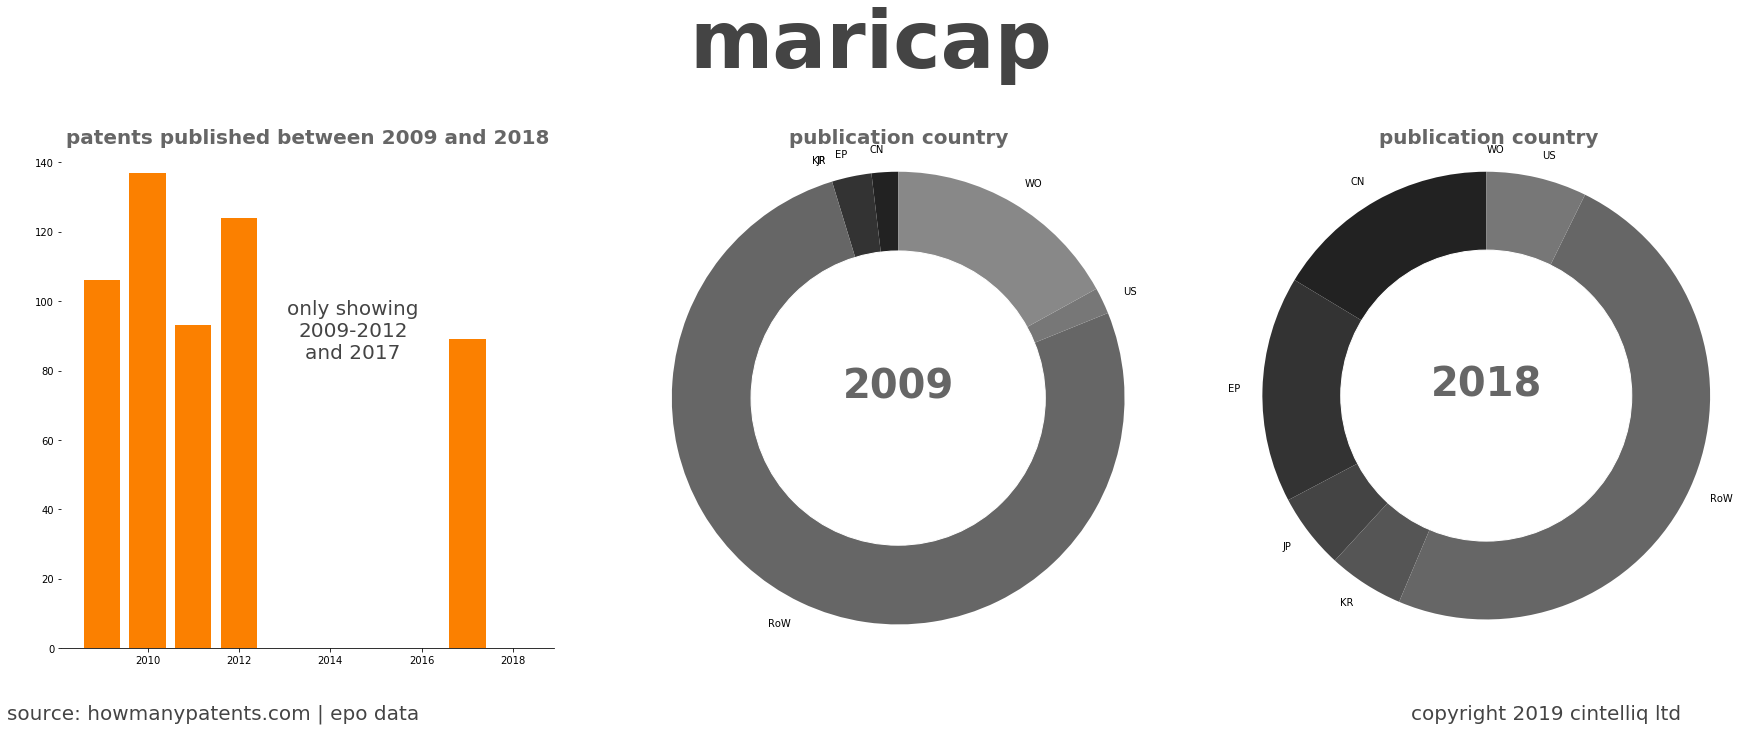 summary of patents for Maricap